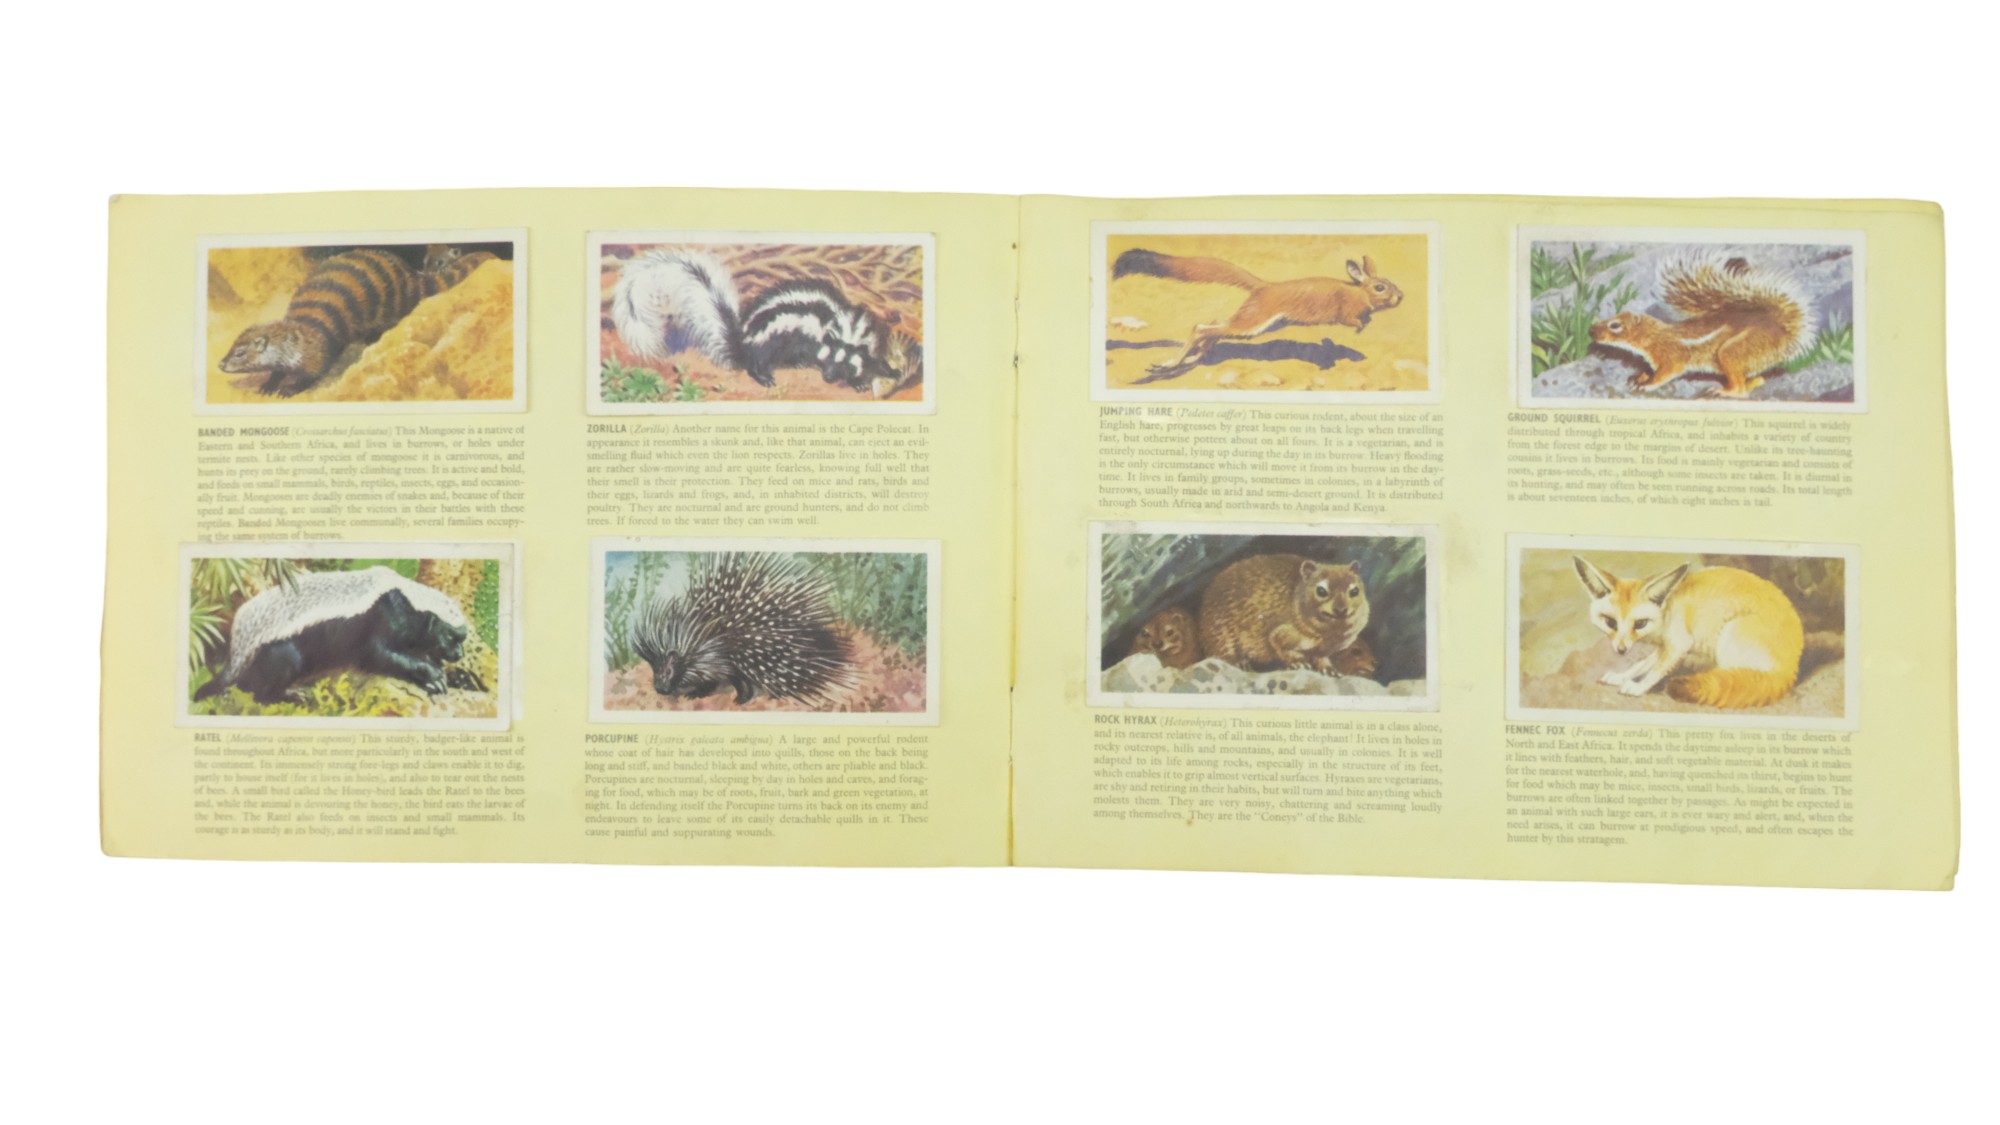 Two albums of John Player & Sons cigarette cards together with Brooke Bond "African Wild Life" tea - Image 4 of 18